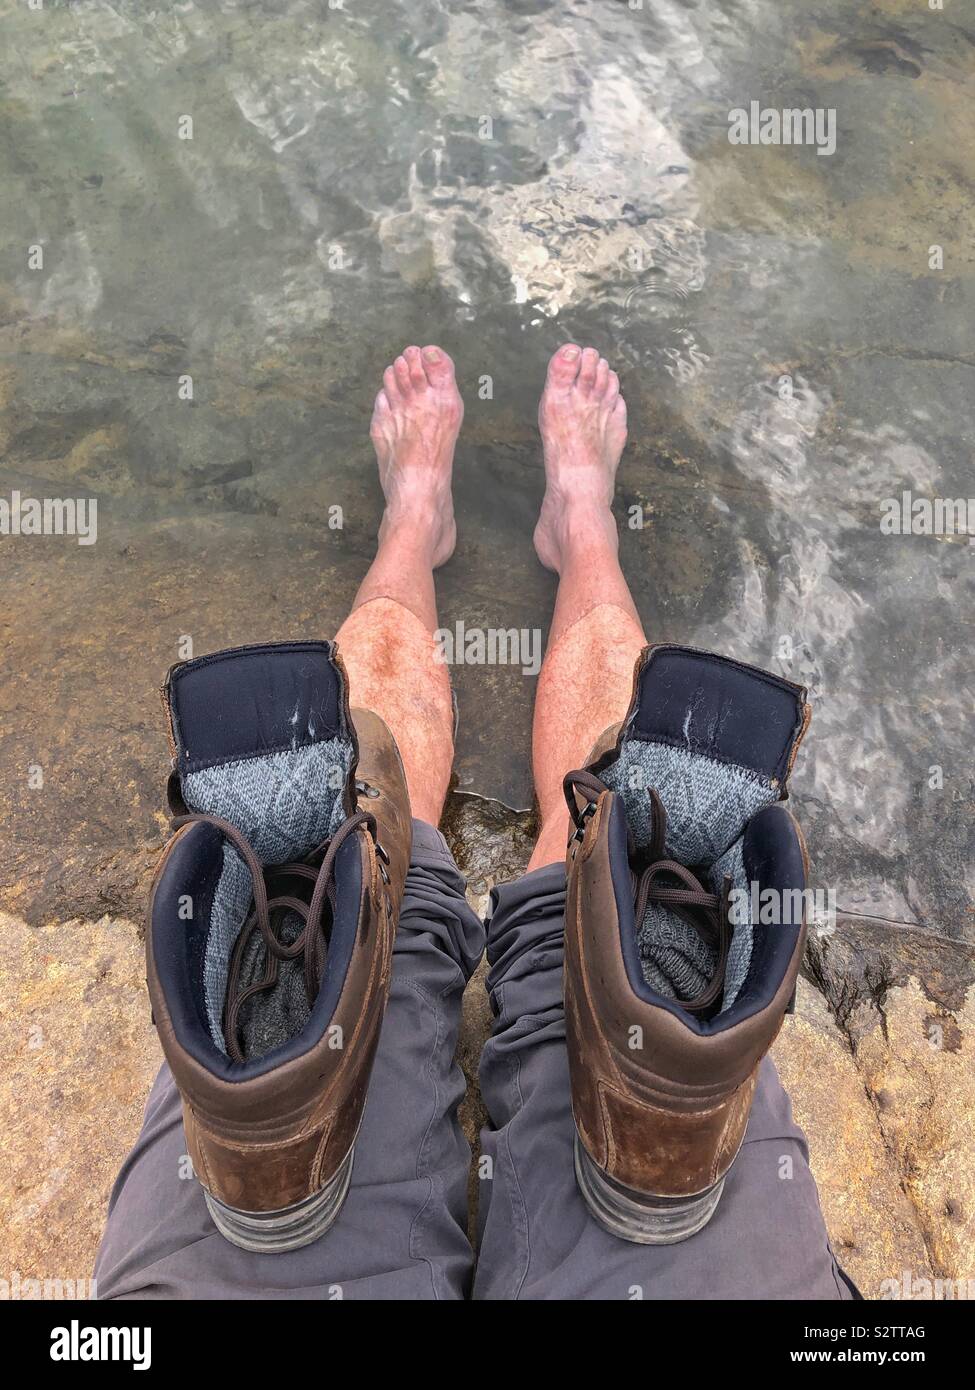 Cooling down the feet in a mountain lake after a long walk. Stock Photo